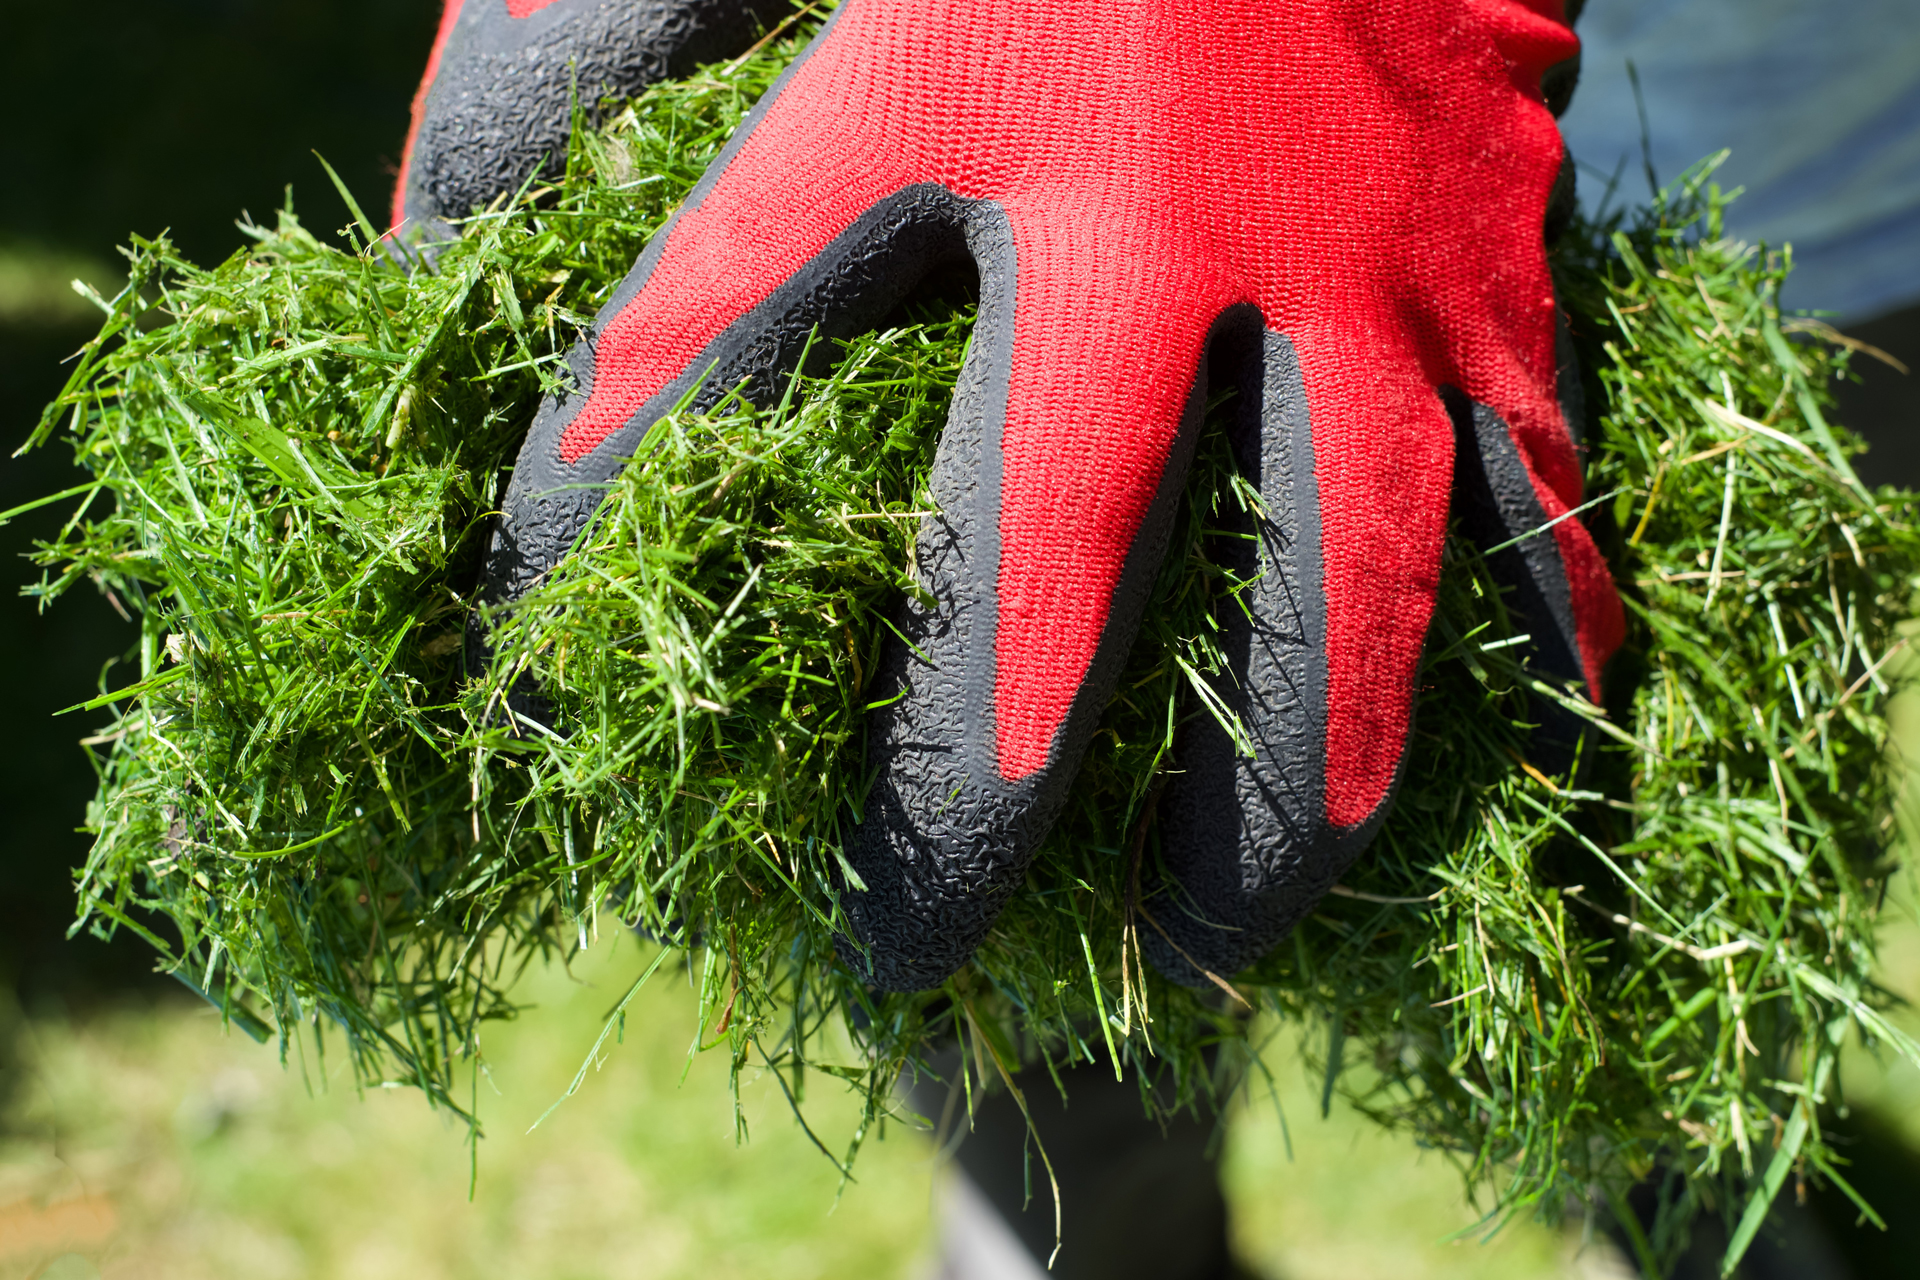 glove holding grass clippings